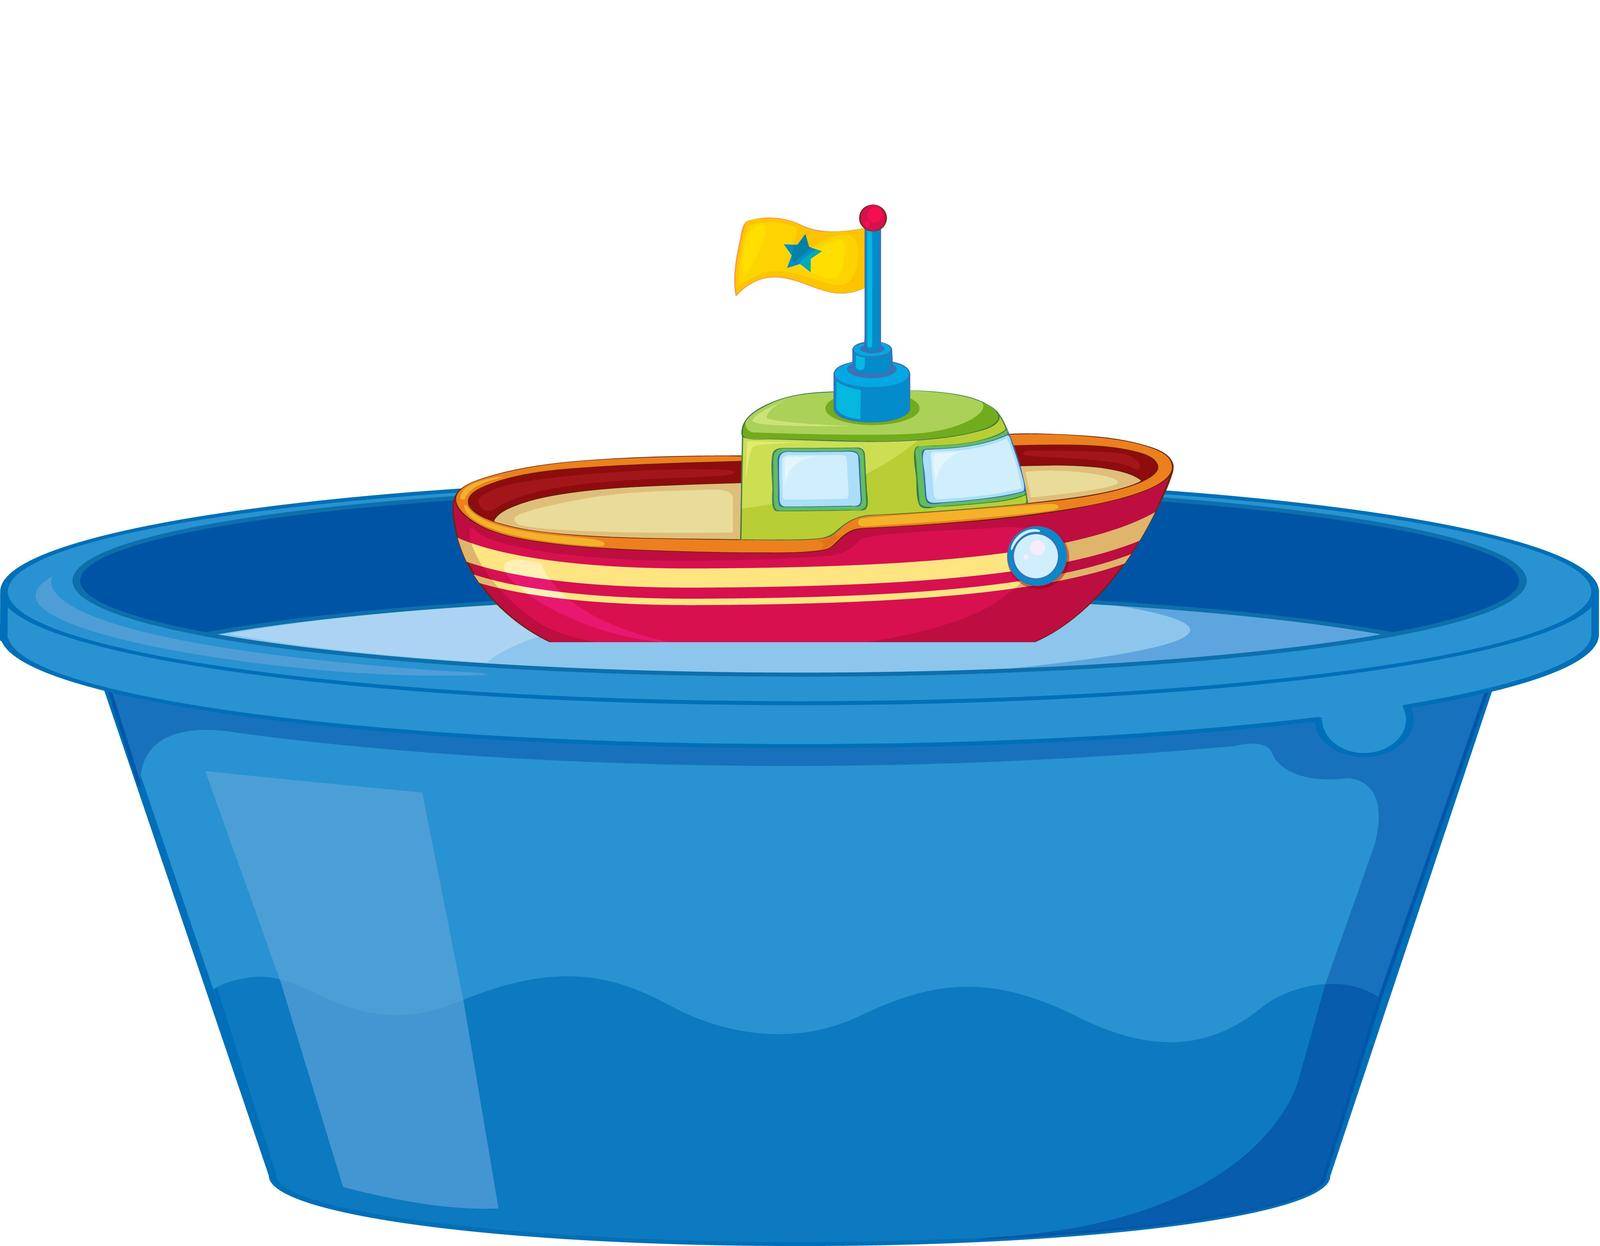 Illustration of a toy boat in tub of water